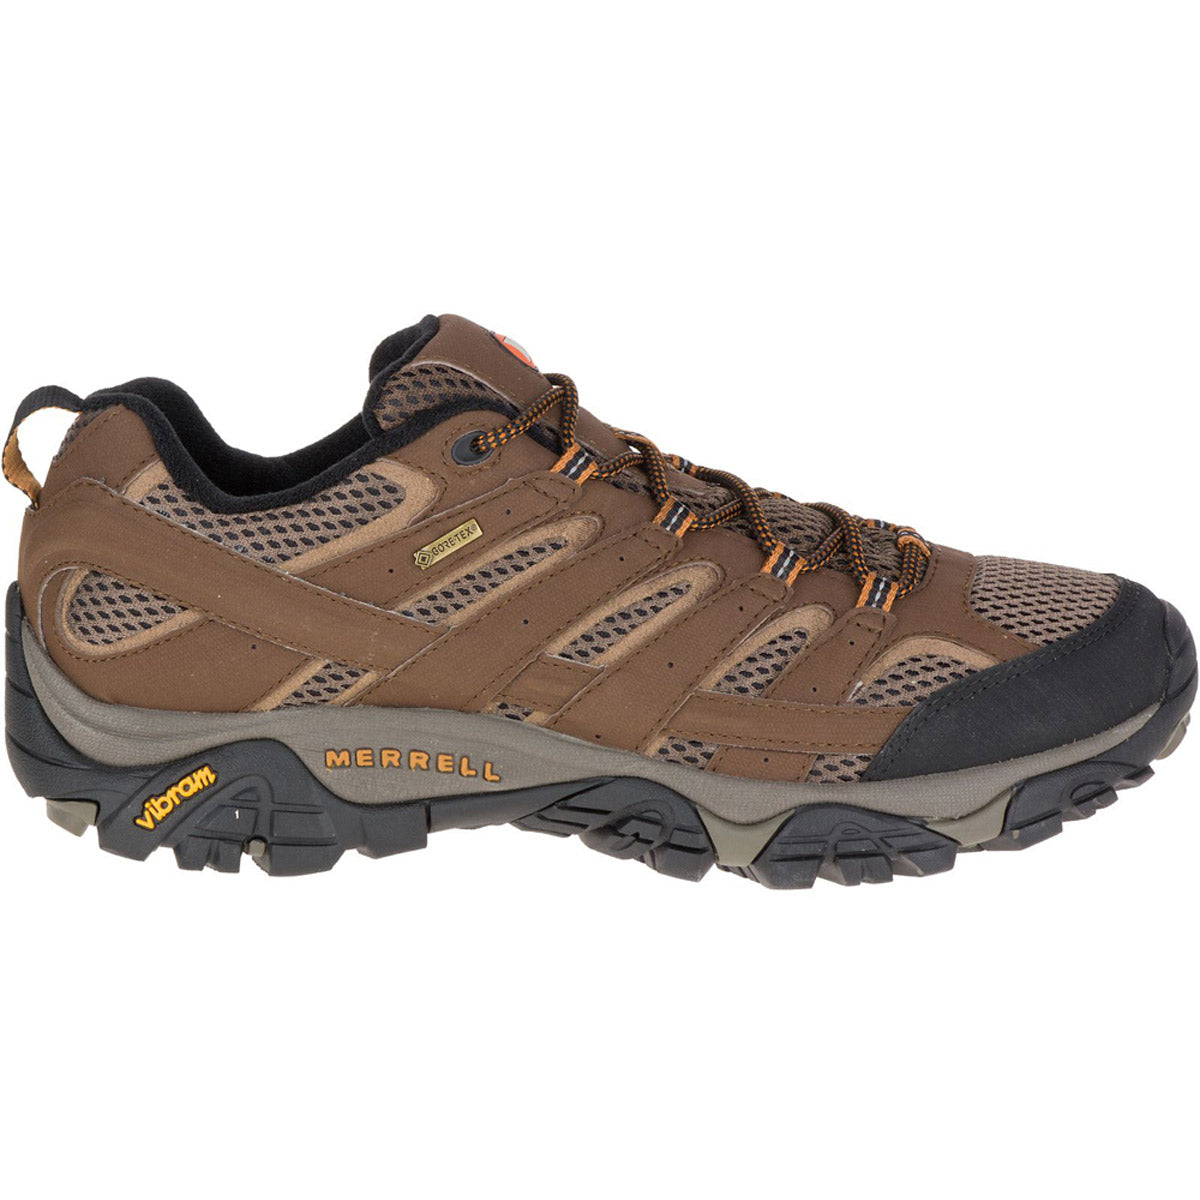 A single Merrell MERRELL MOAB 2 LOW GTX EARTH - MENS hiking shoe with Vibram traction sole.